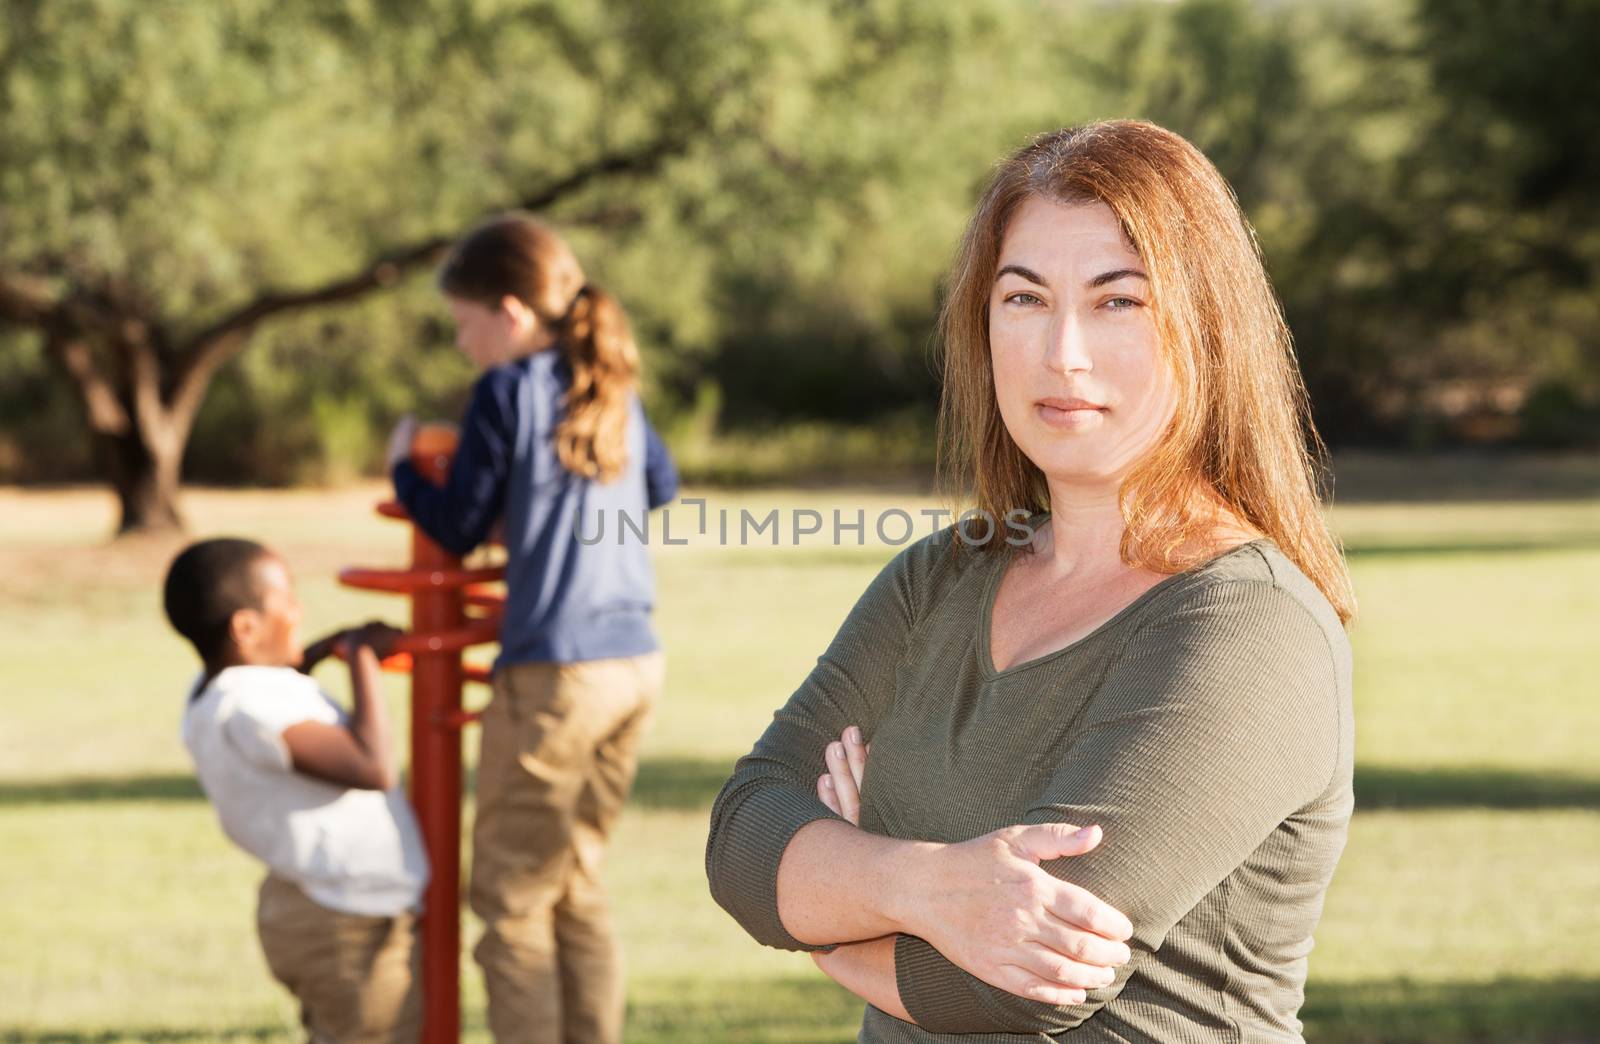 Single mother standing in front of two children playing behind her